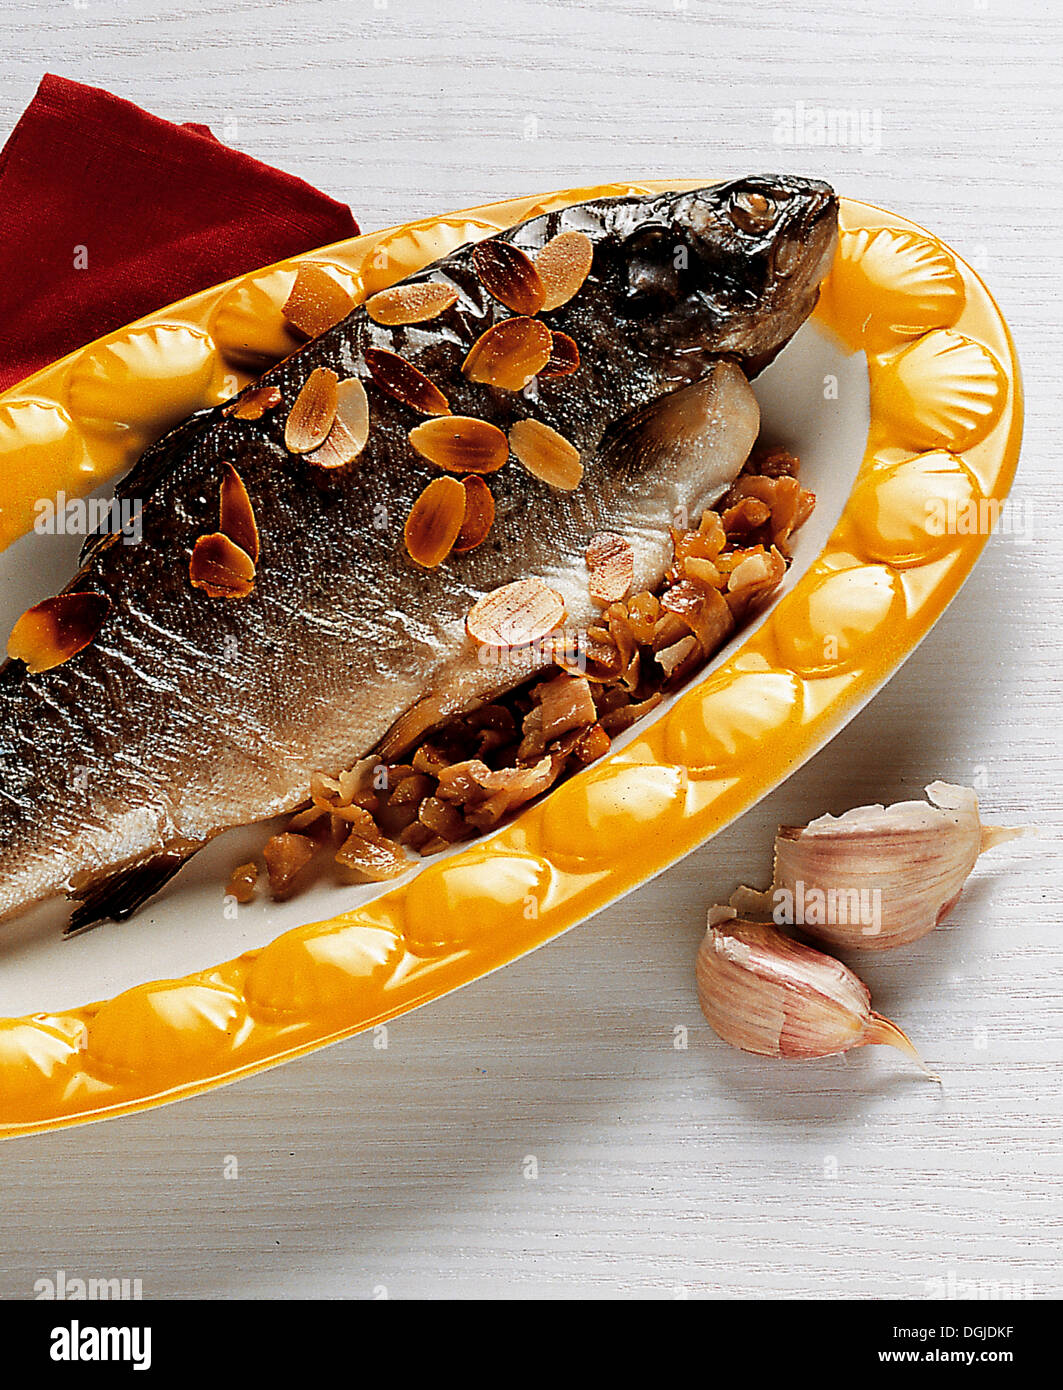 Trout with Serrano ham and sliced almonds, Spain. Stock Photo